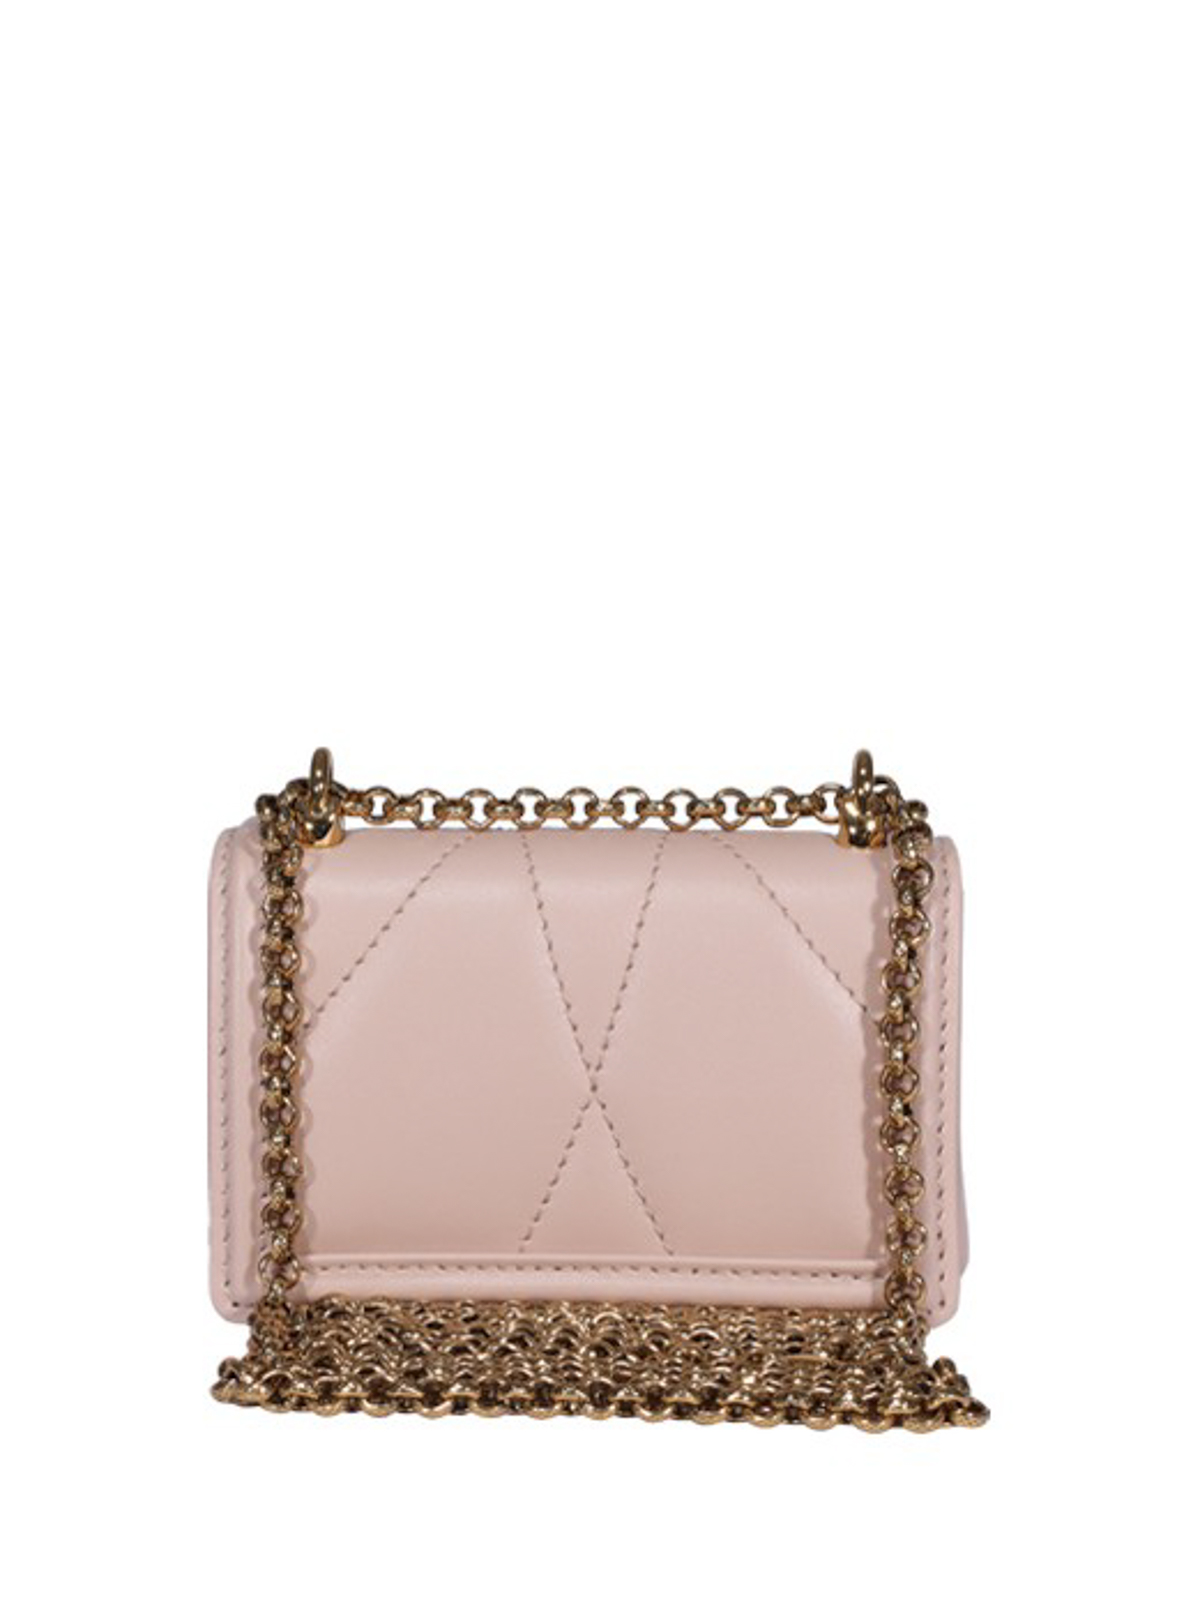 Devotion Micro Bag In Quilted Nappa Leather by Dolce & Gabbana at